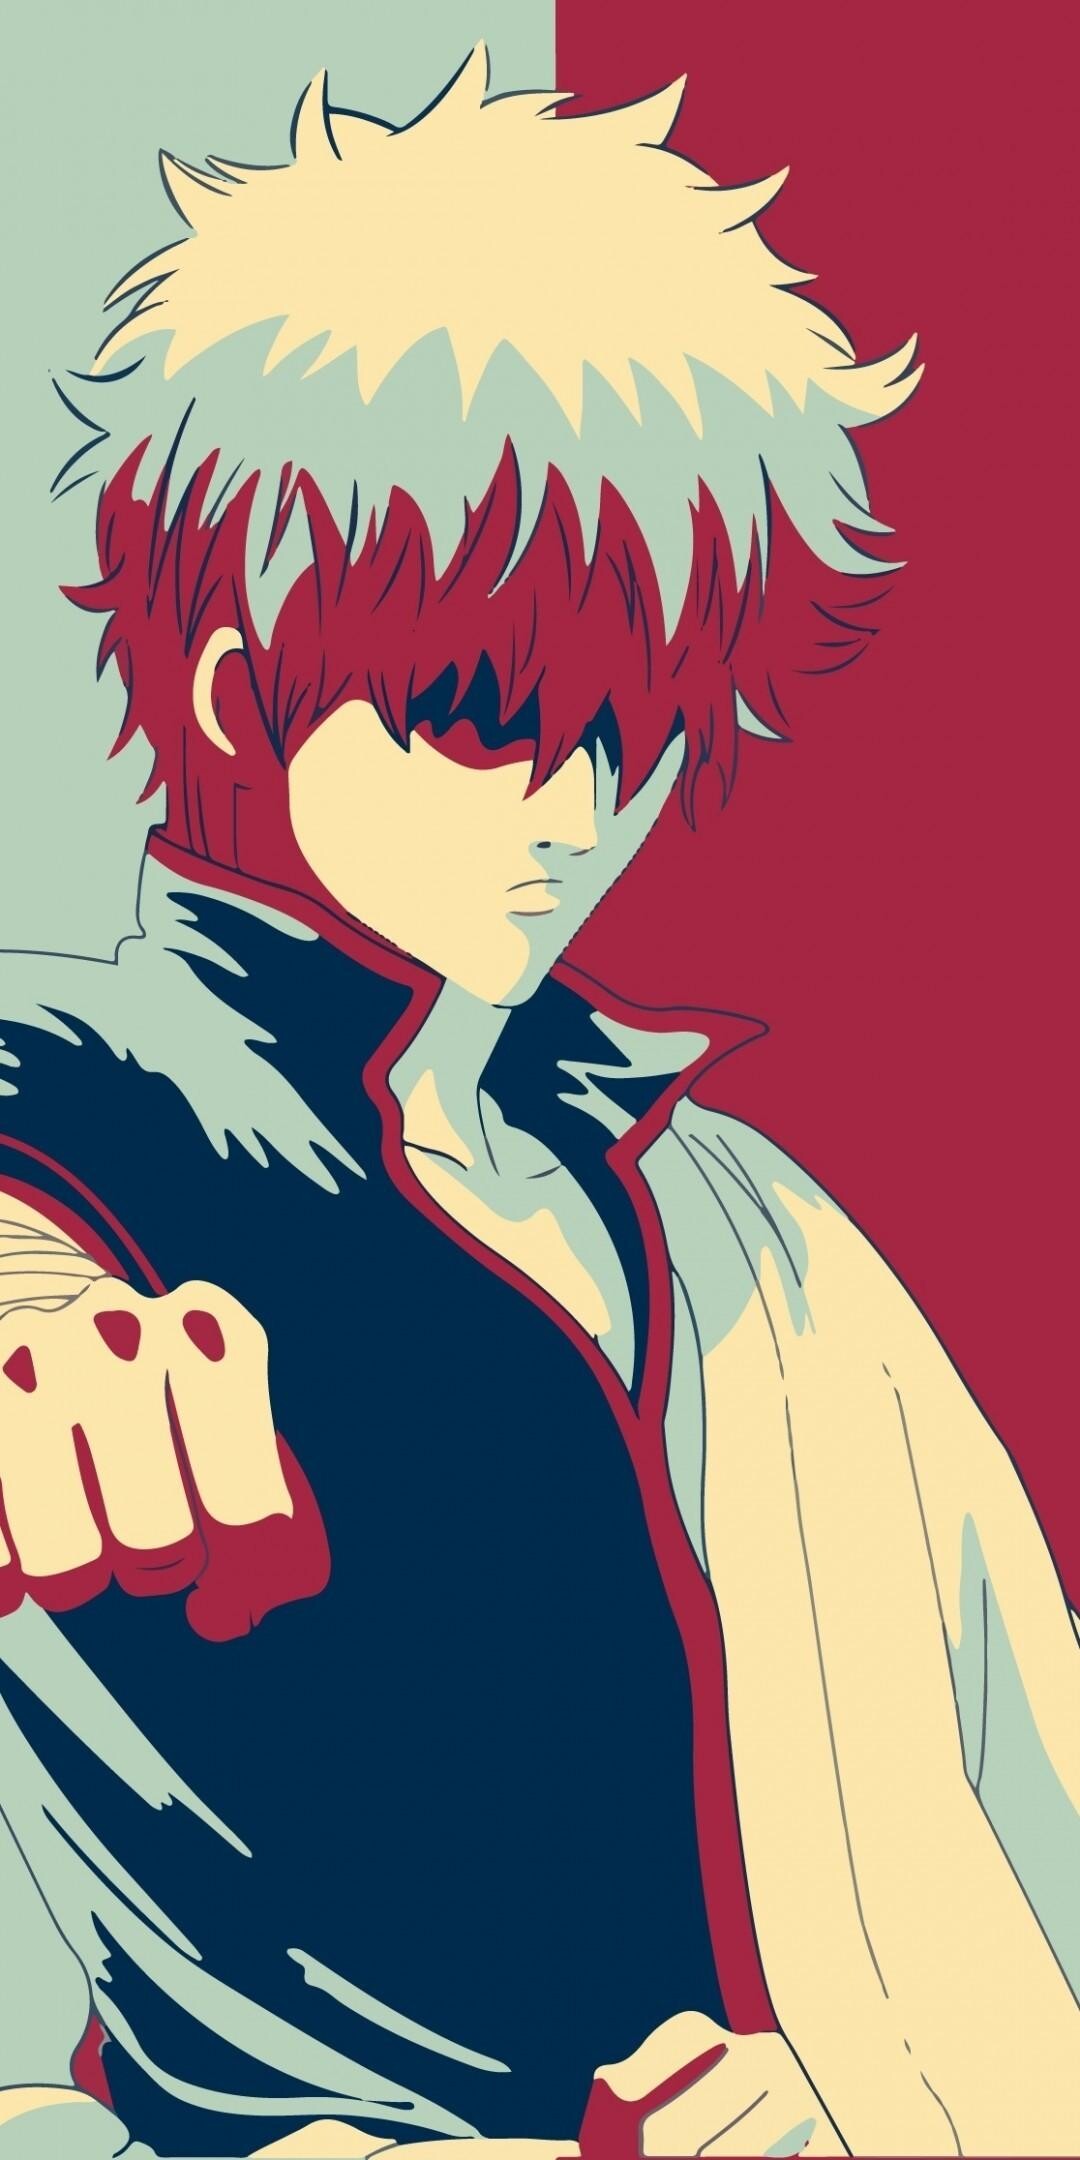 Gintoki Sakata: A samurai capable of turning the tide of any battle, Called “The Ace” by Katsura and Takasugi. 1080x2160 HD Wallpaper.